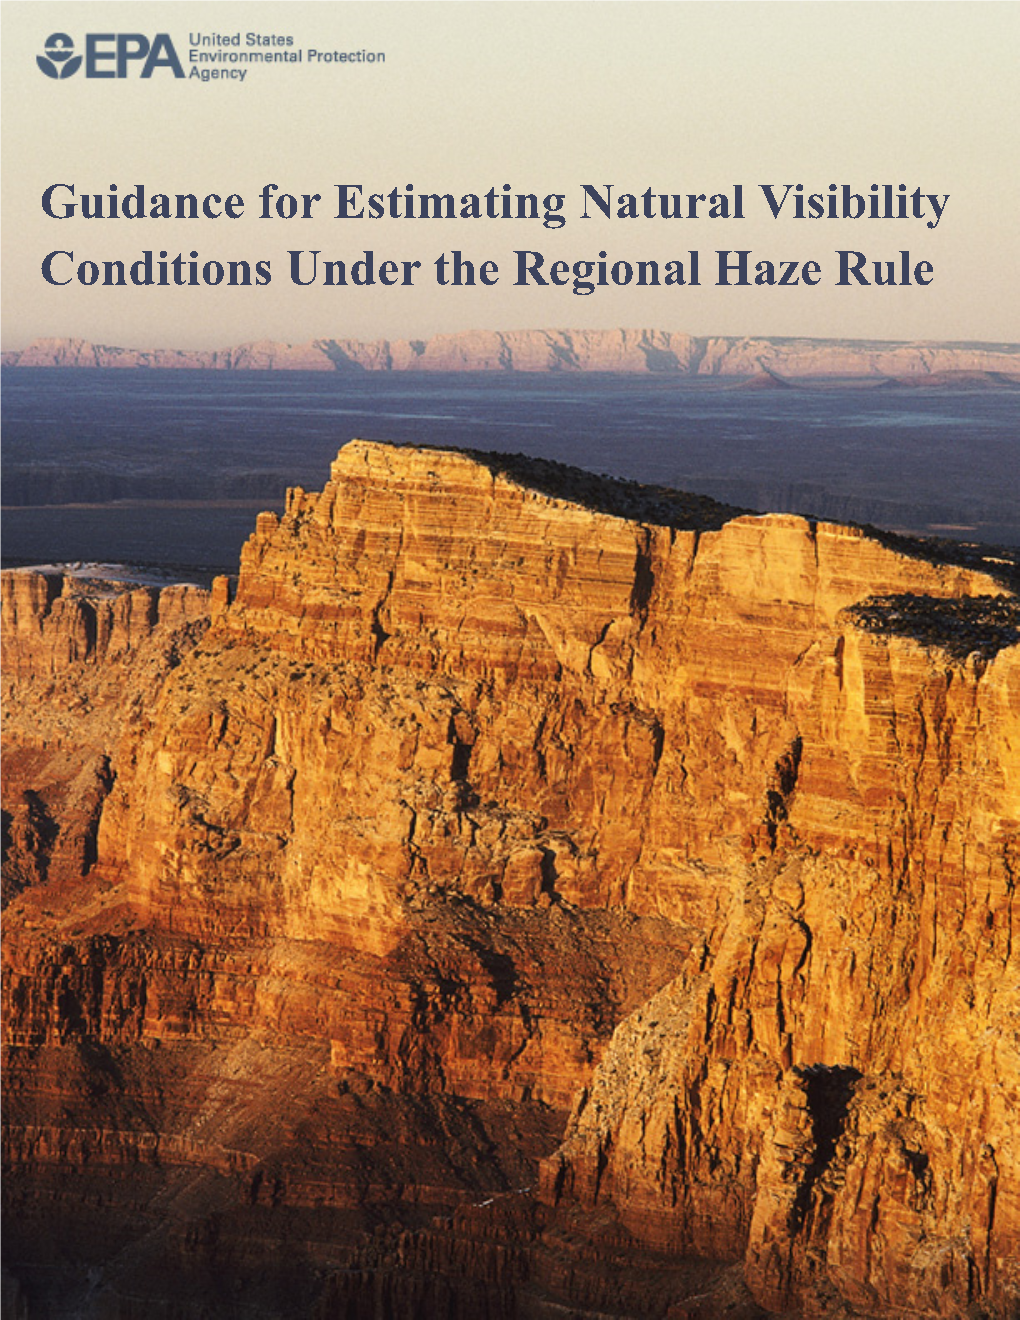 Estimating Natural Visibility Conditions Under the Regional Haze Rule EPA-454/B-03-005 September 2003